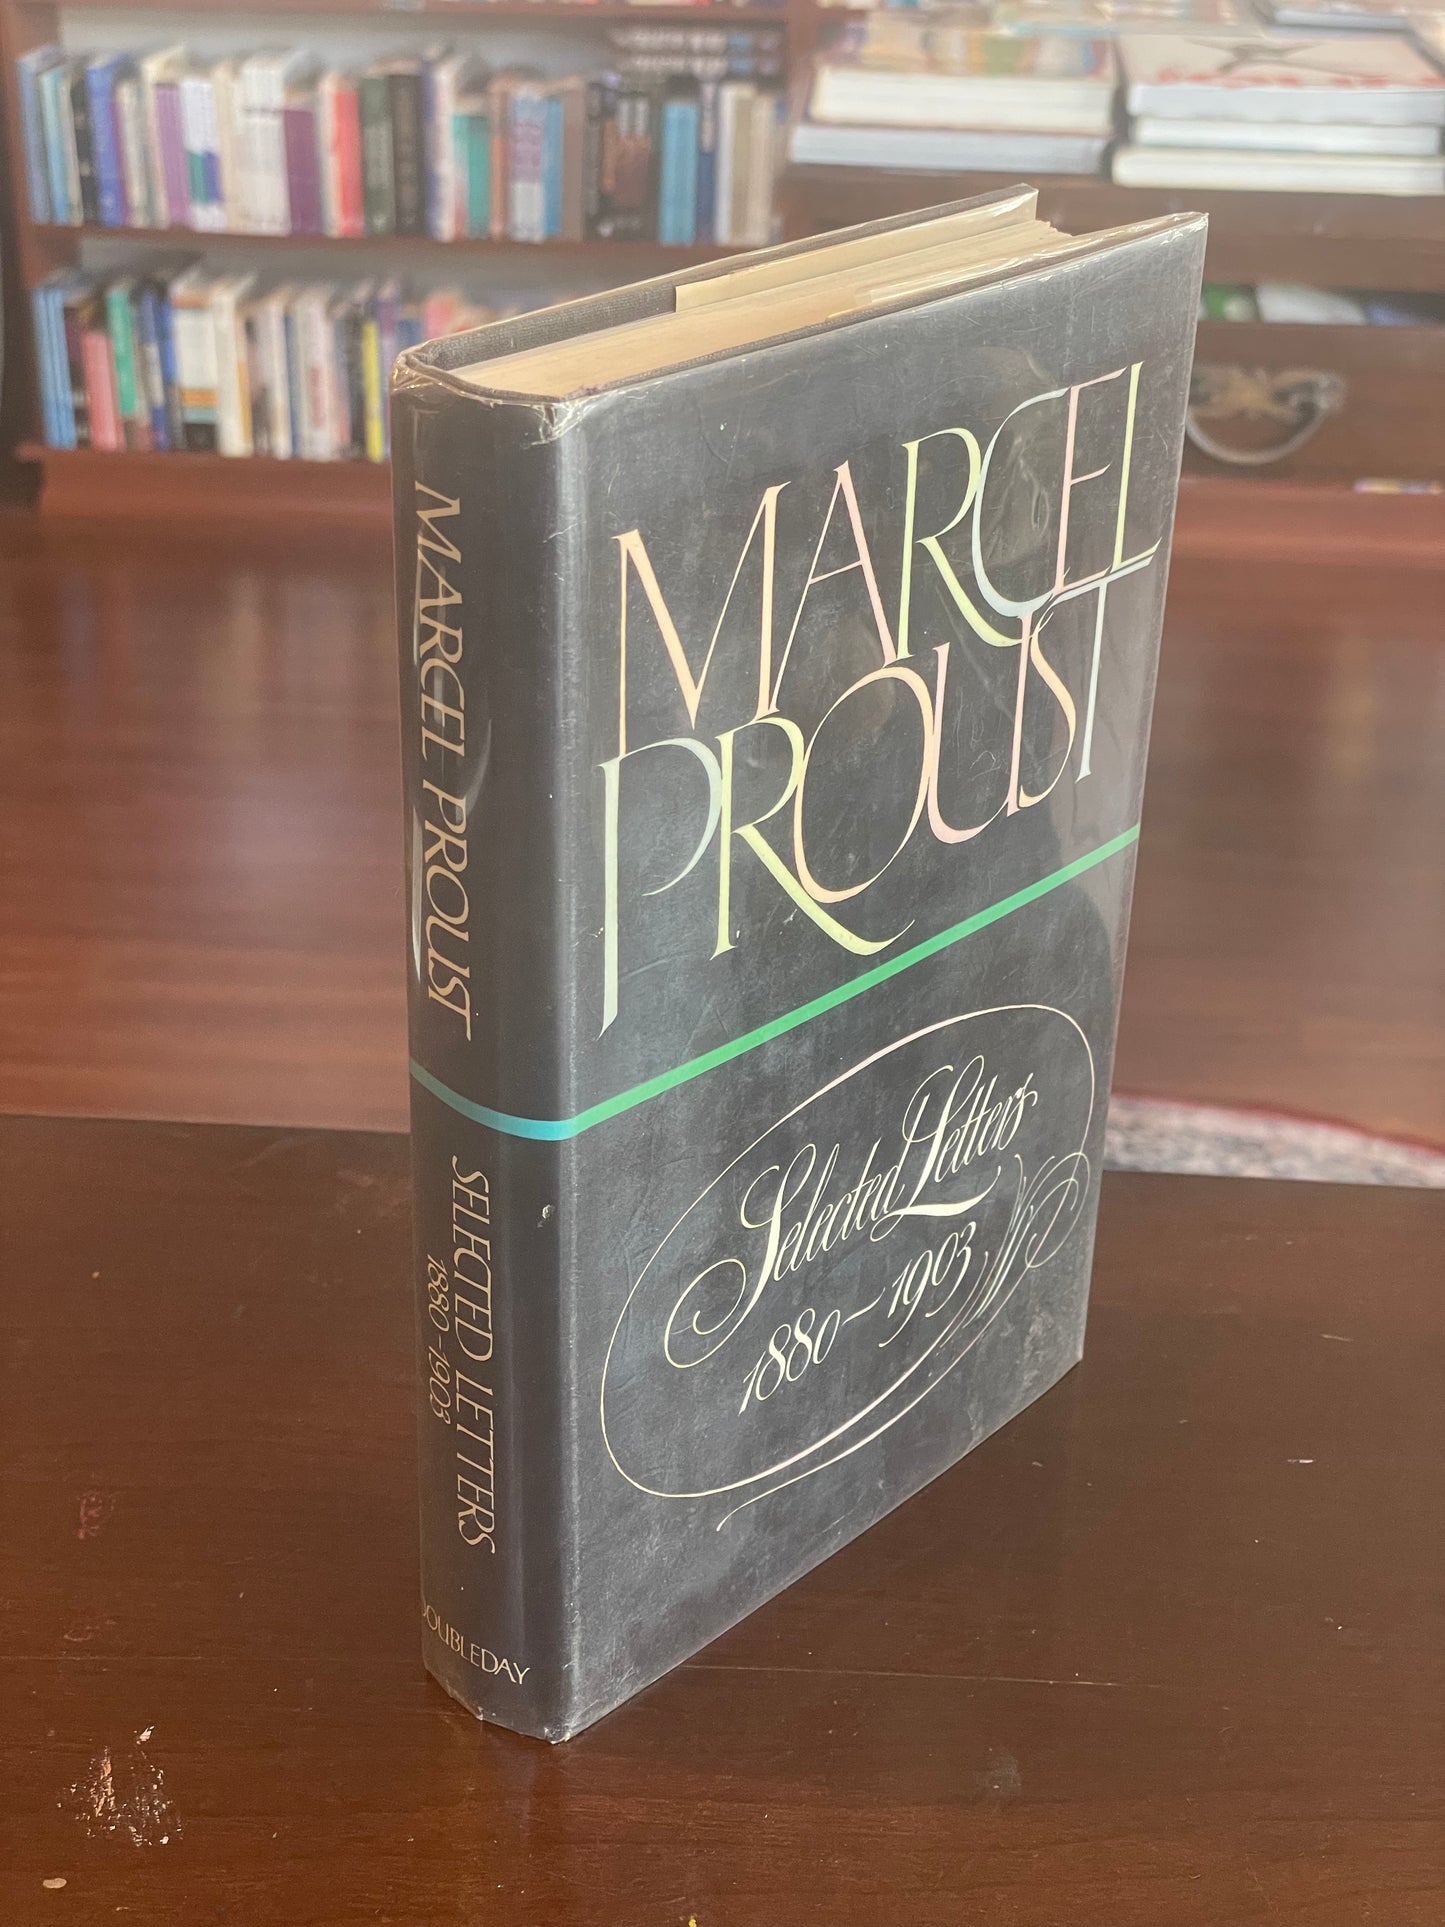 Marcel Proust Selected Letters (first edition)